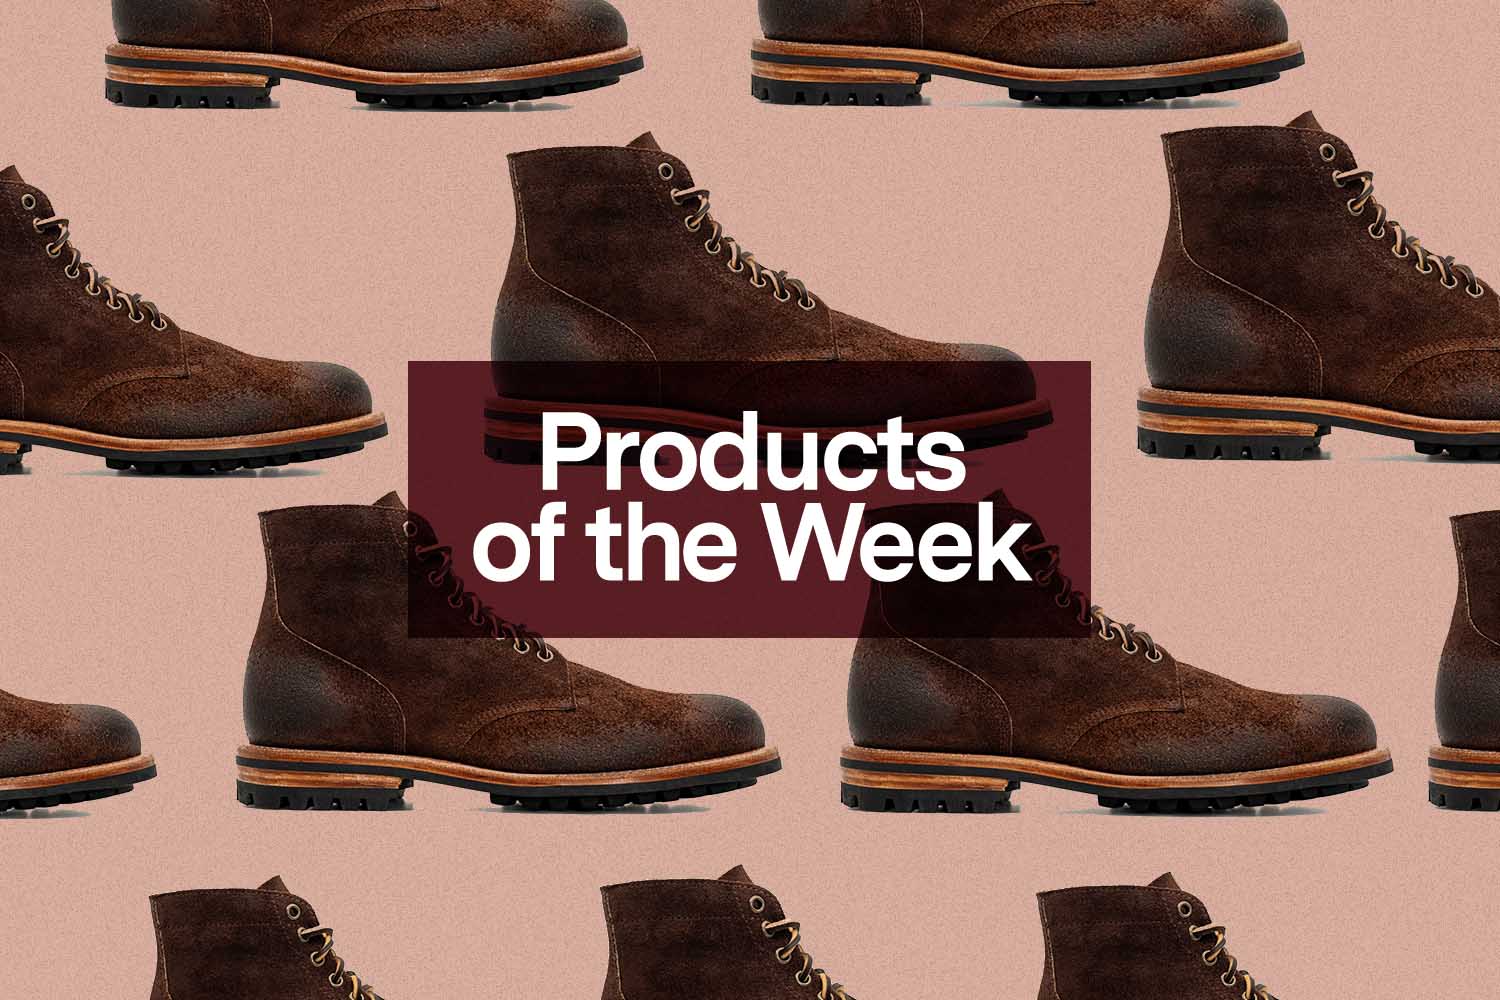 Products of the Week: Pendleton Blankets, Oak Street Boots and Gingerbread Spiced Stout